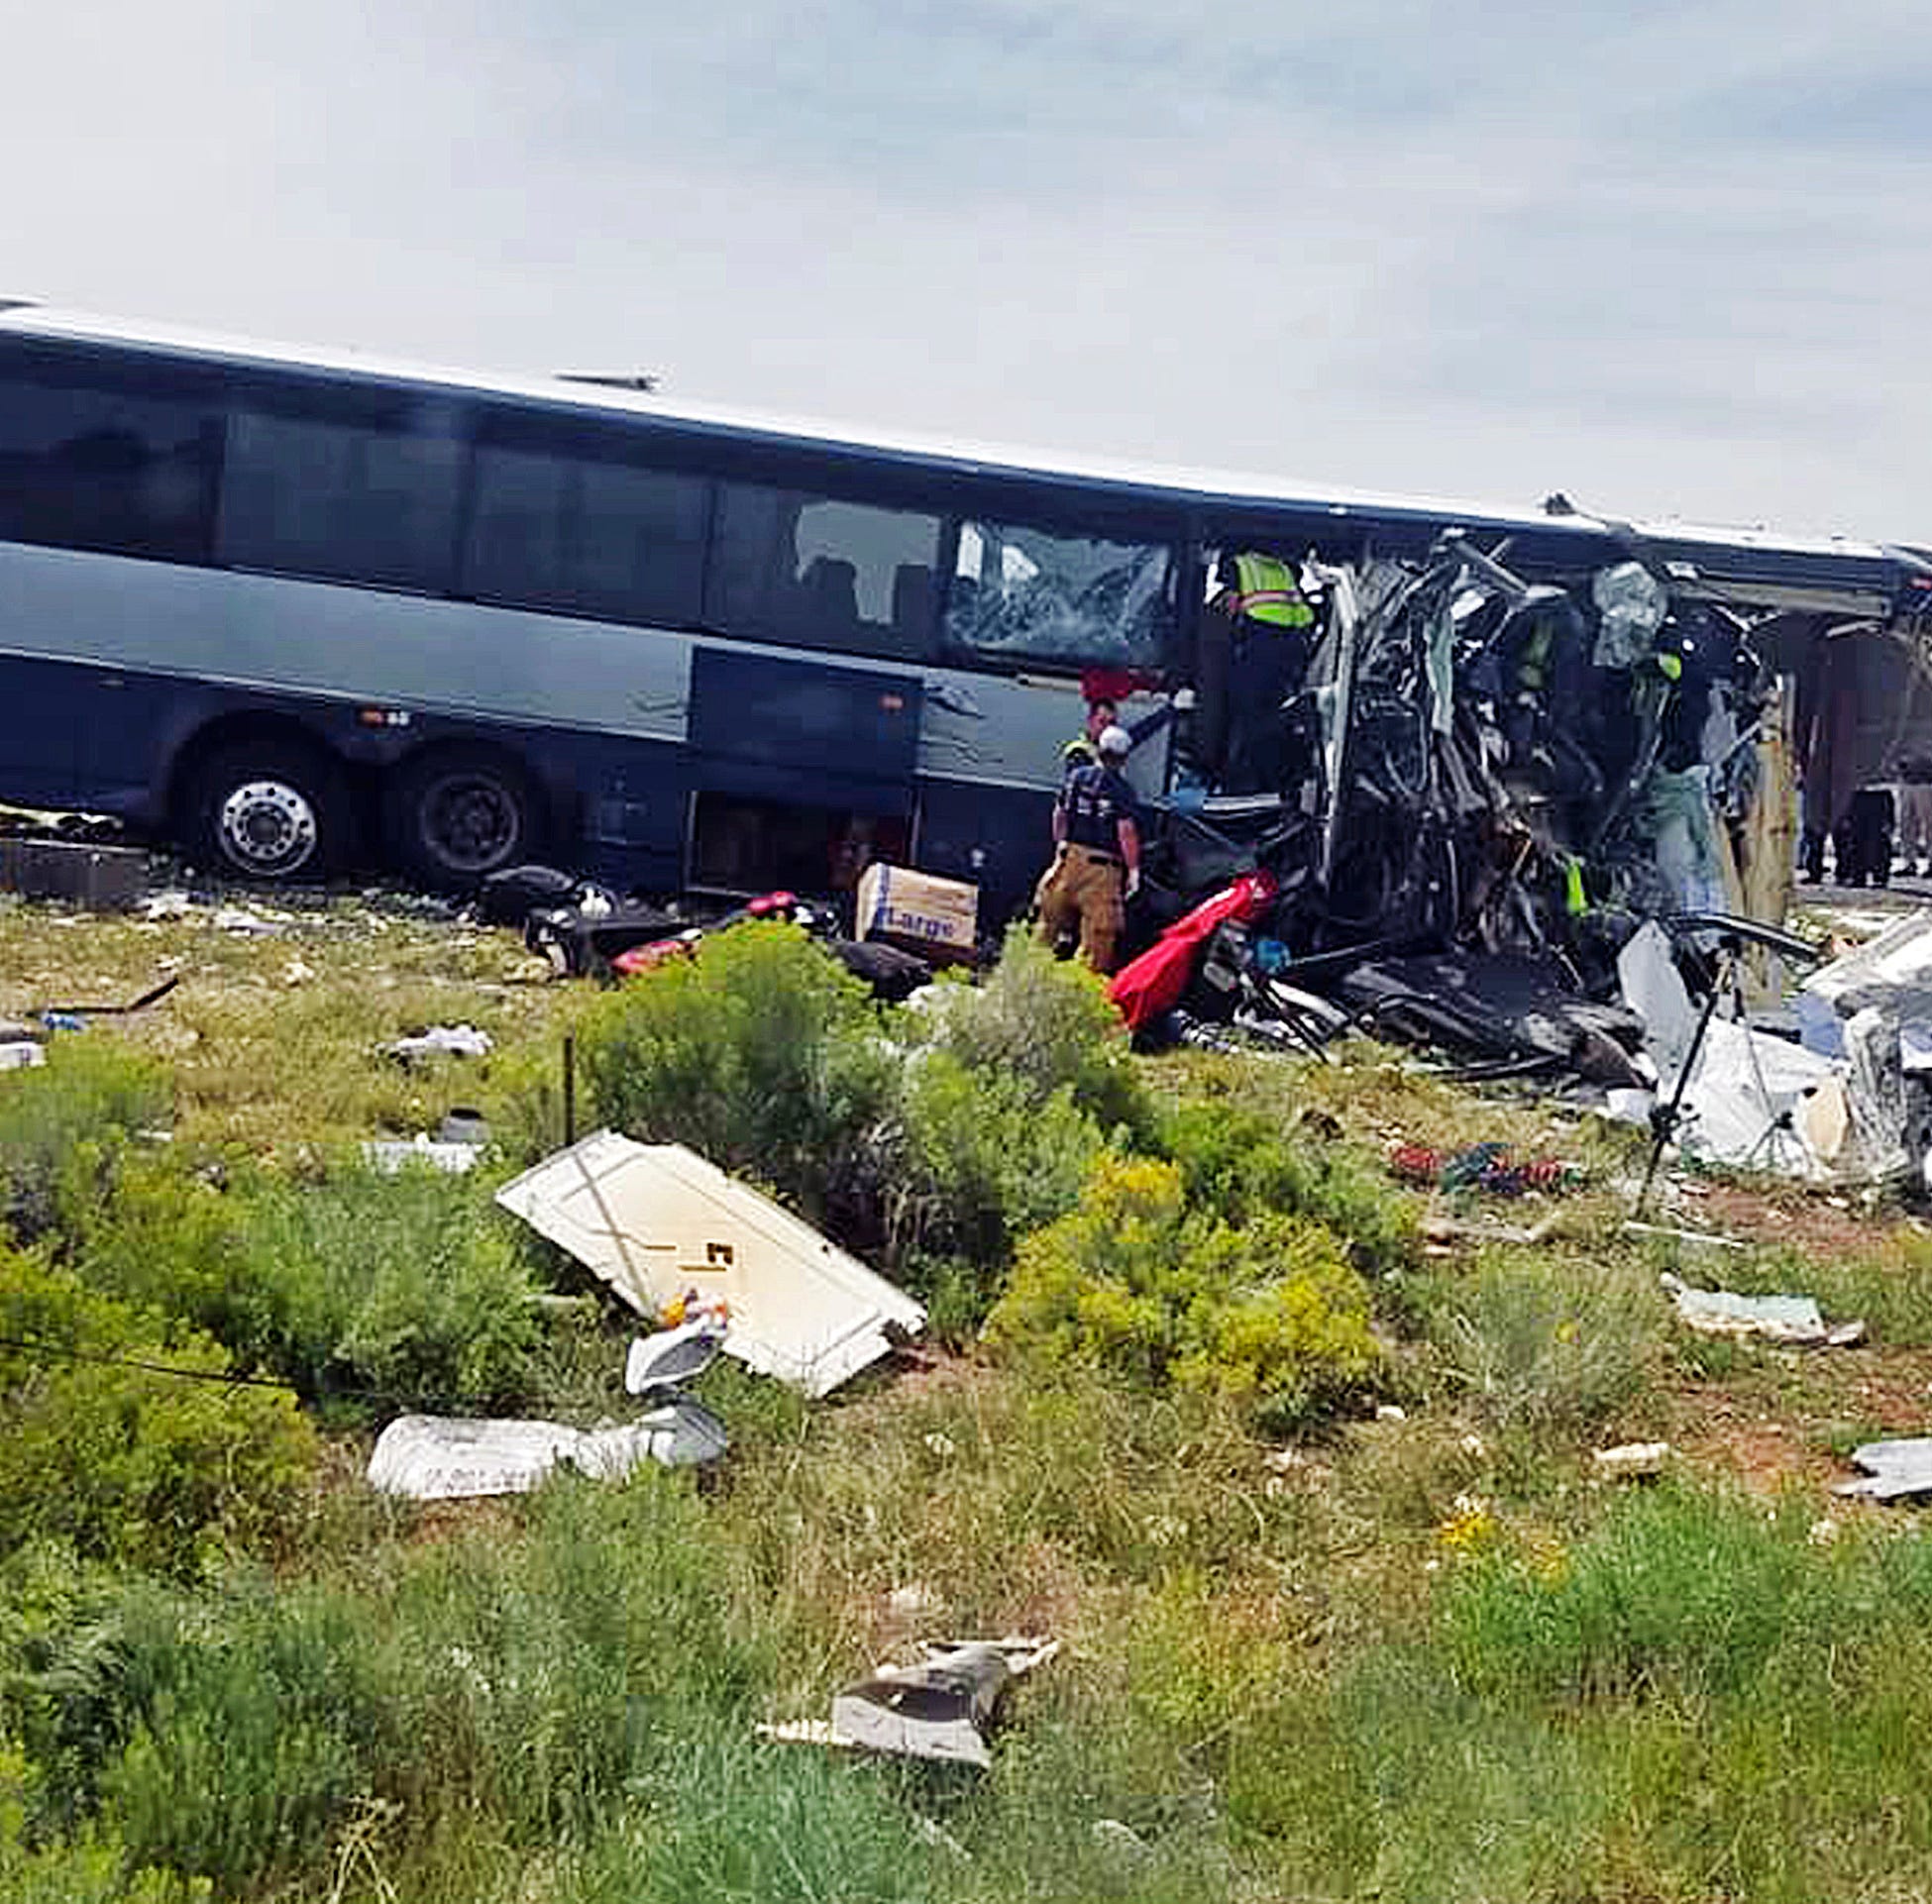 This photo provided by Chris Jones shows first responders working the scene of a collision between a Greyhound passenger bus and a semi-truck on Interstate 40 near the town of Thoreau, N.M., near the Arizona border, Thursday, Aug. 30, 2018. Multiple 